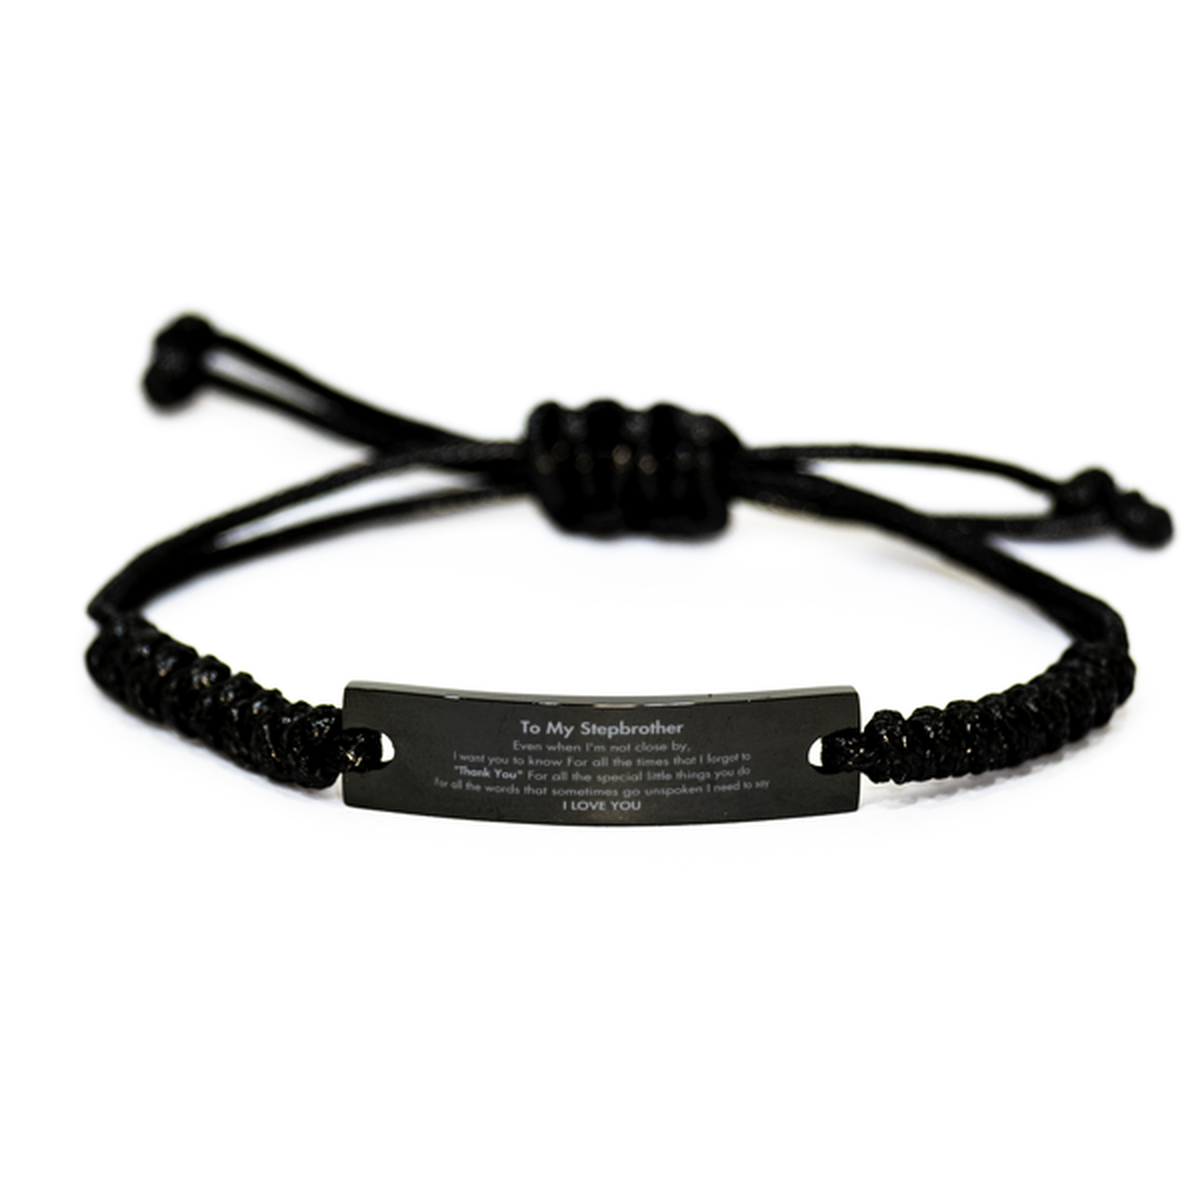 Thank You Gifts for Stepbrother, Keepsake Black Rope Bracelet Gifts for Stepbrother Birthday Mother's day Father's Day Stepbrother For all the words That sometimes go unspoken I need to say I LOVE YOU